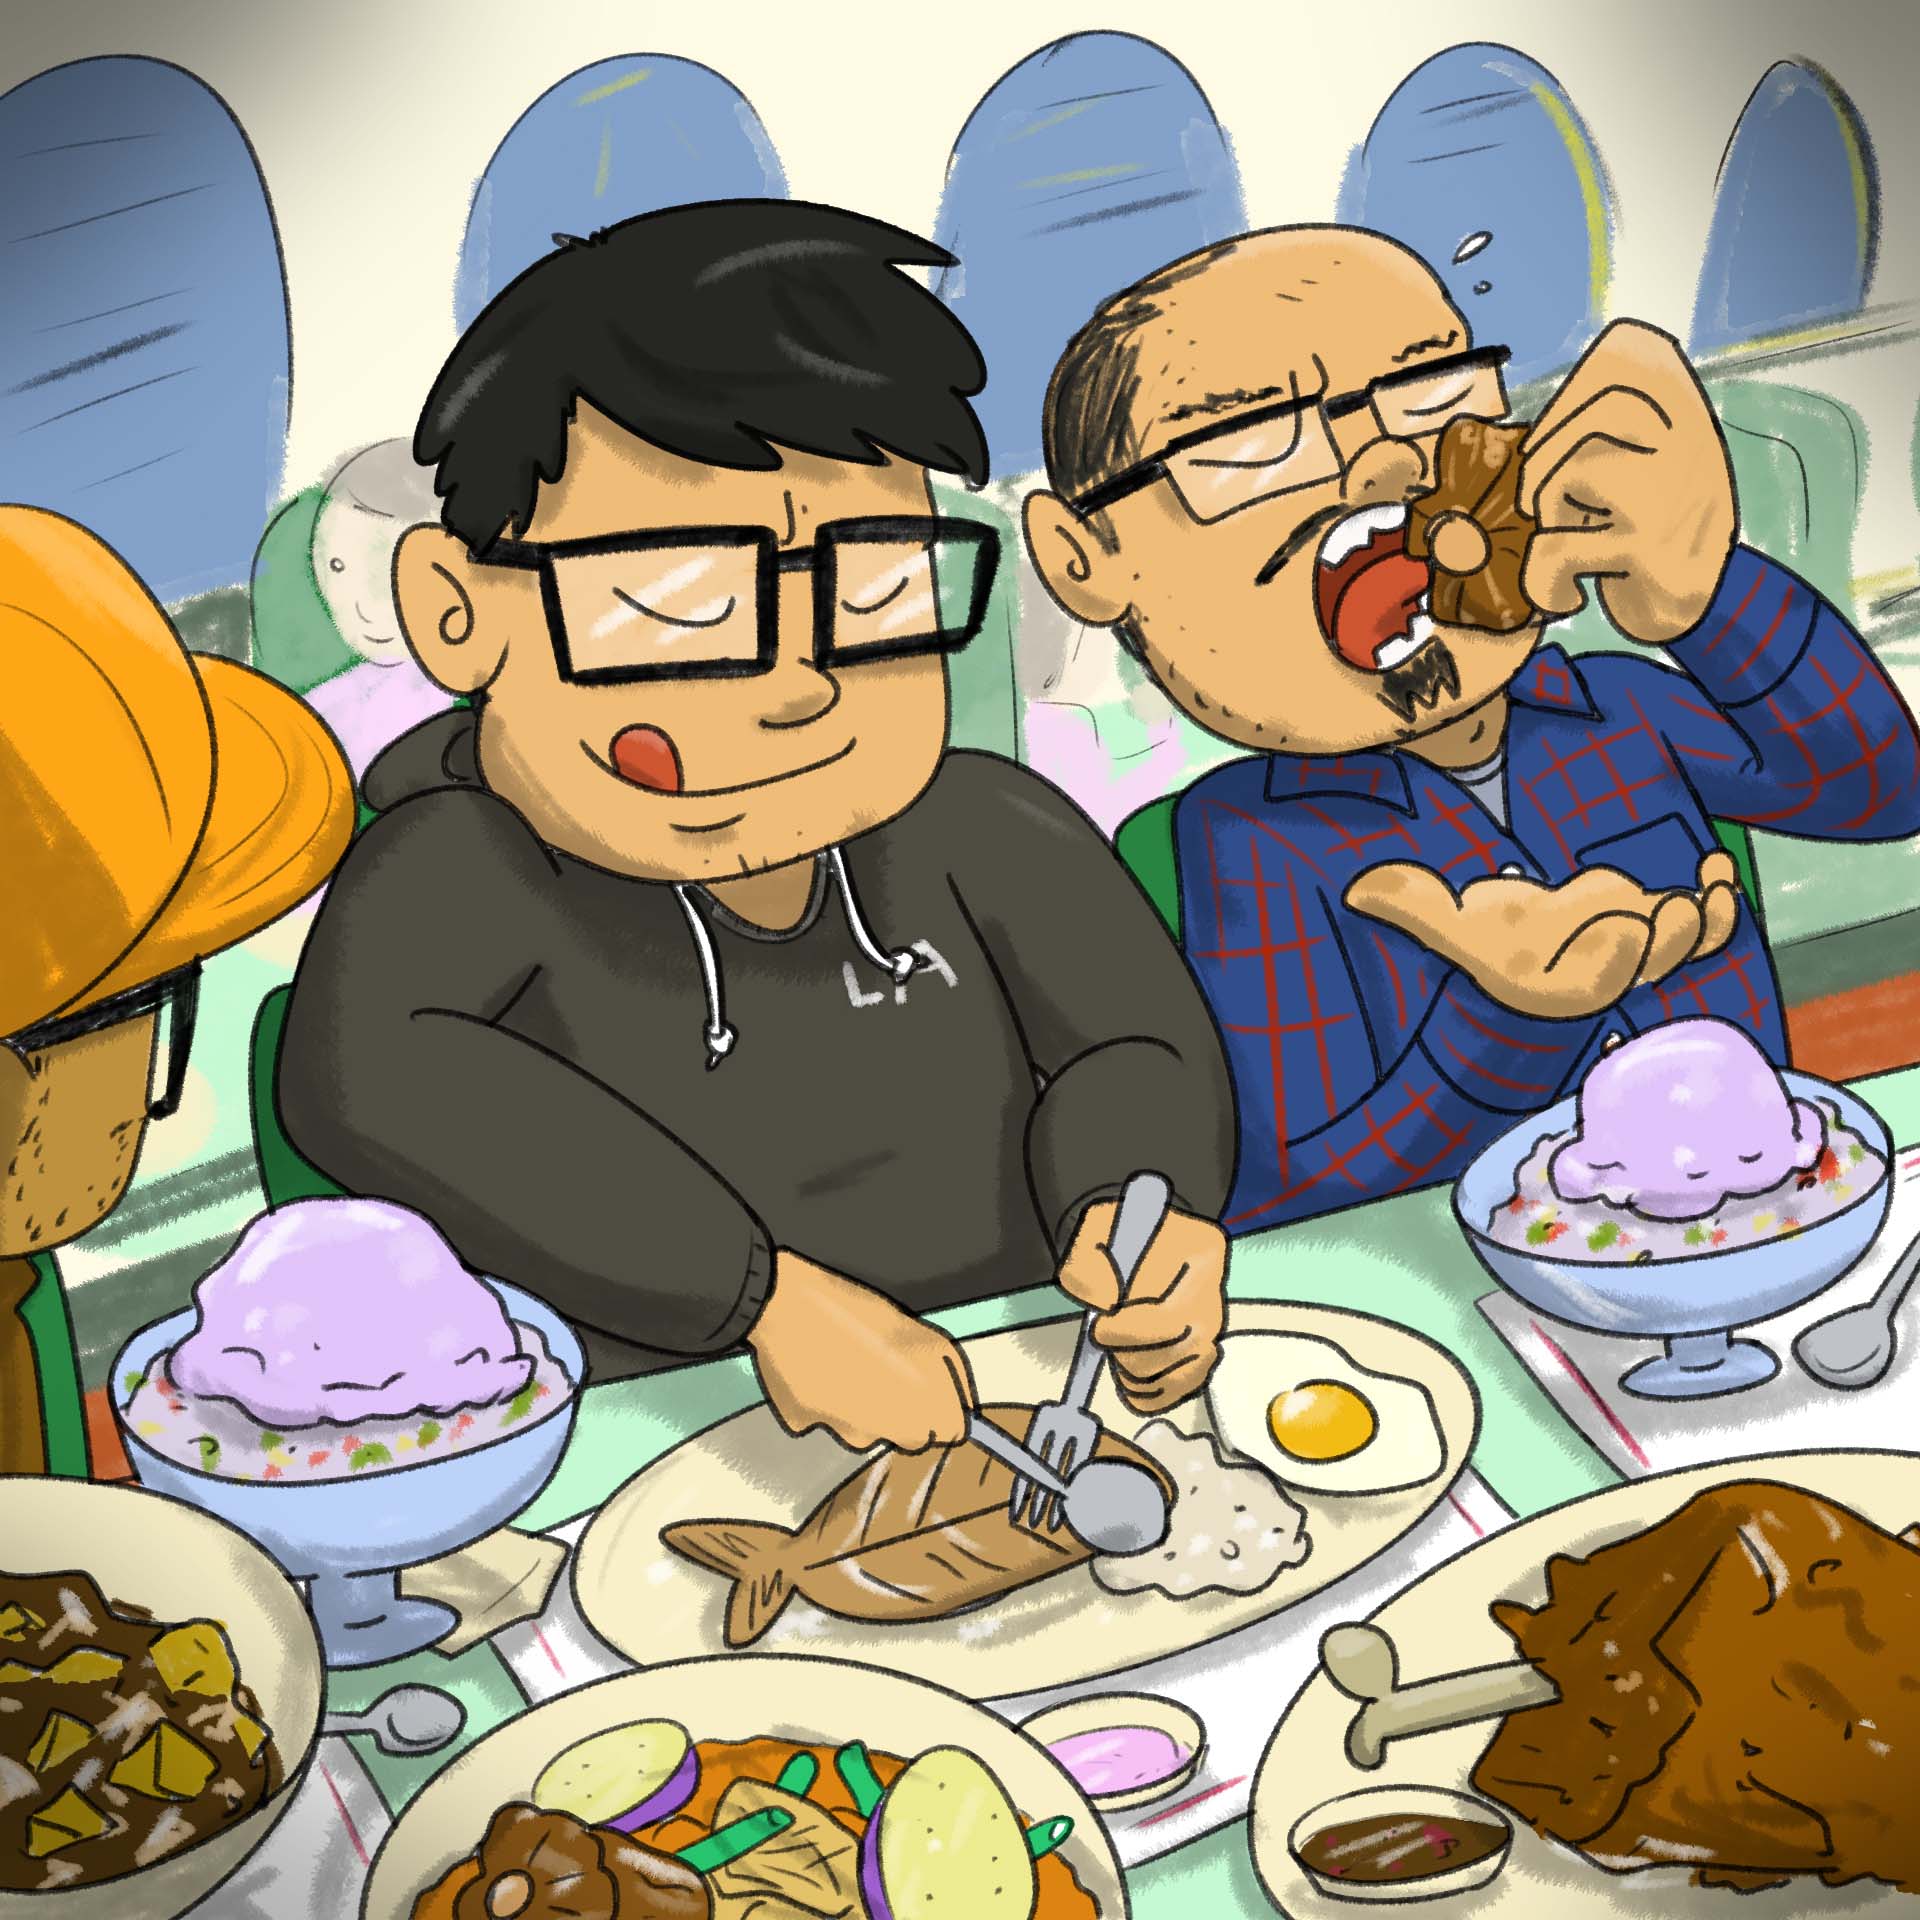 Illustration of three men devouring halo-halo and other Filipino food at a diner counter.